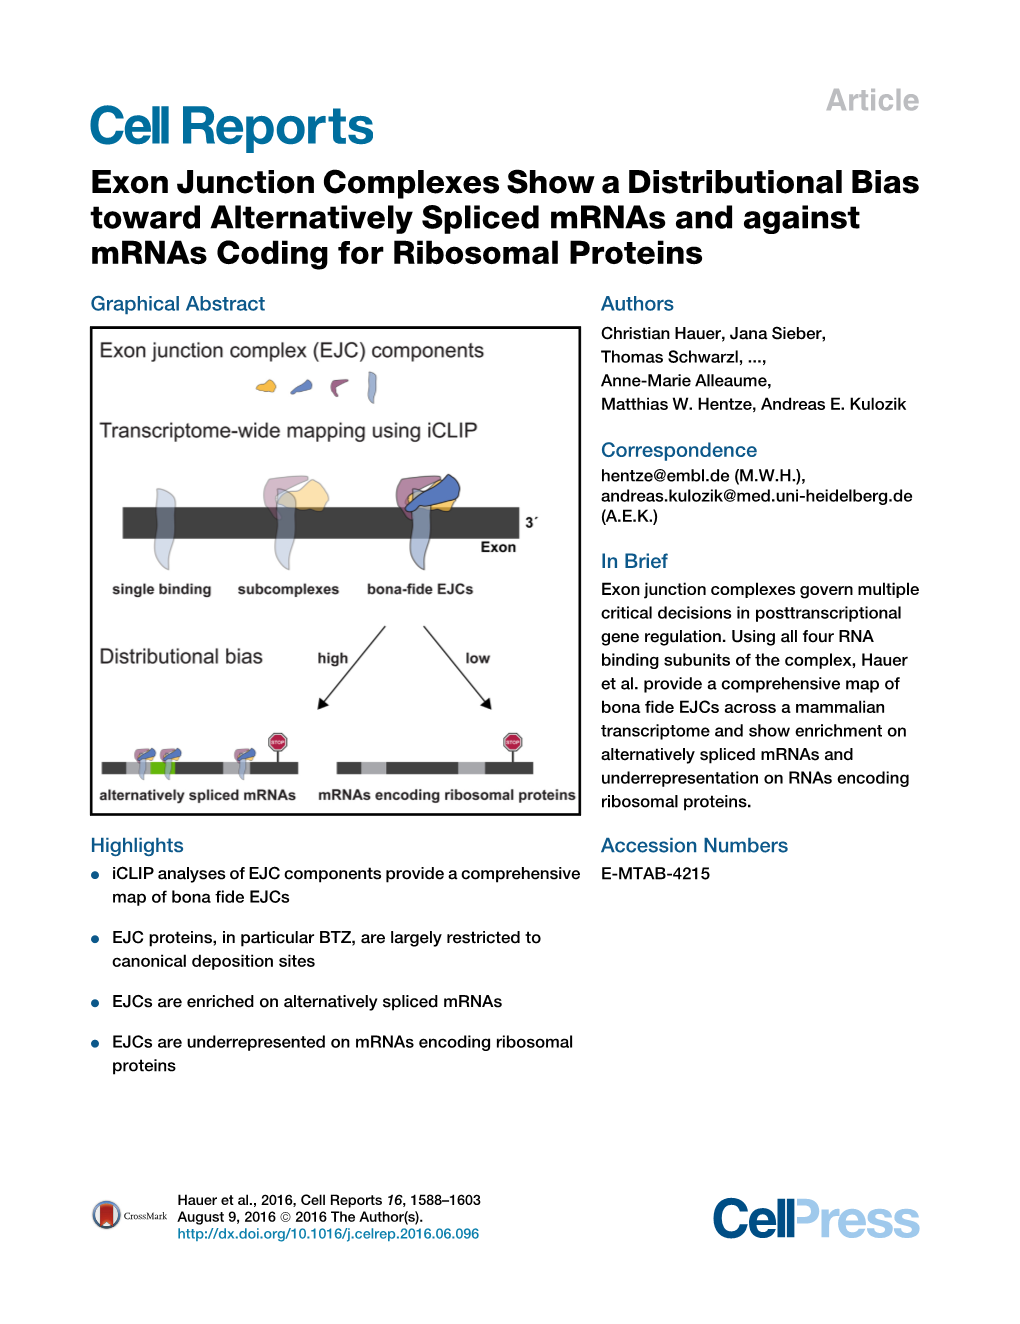 Exon Junction Complexes Show a Distributional Bias Toward Alternatively Spliced Mrnas and Against Mrnas Coding for Ribosomal Proteins